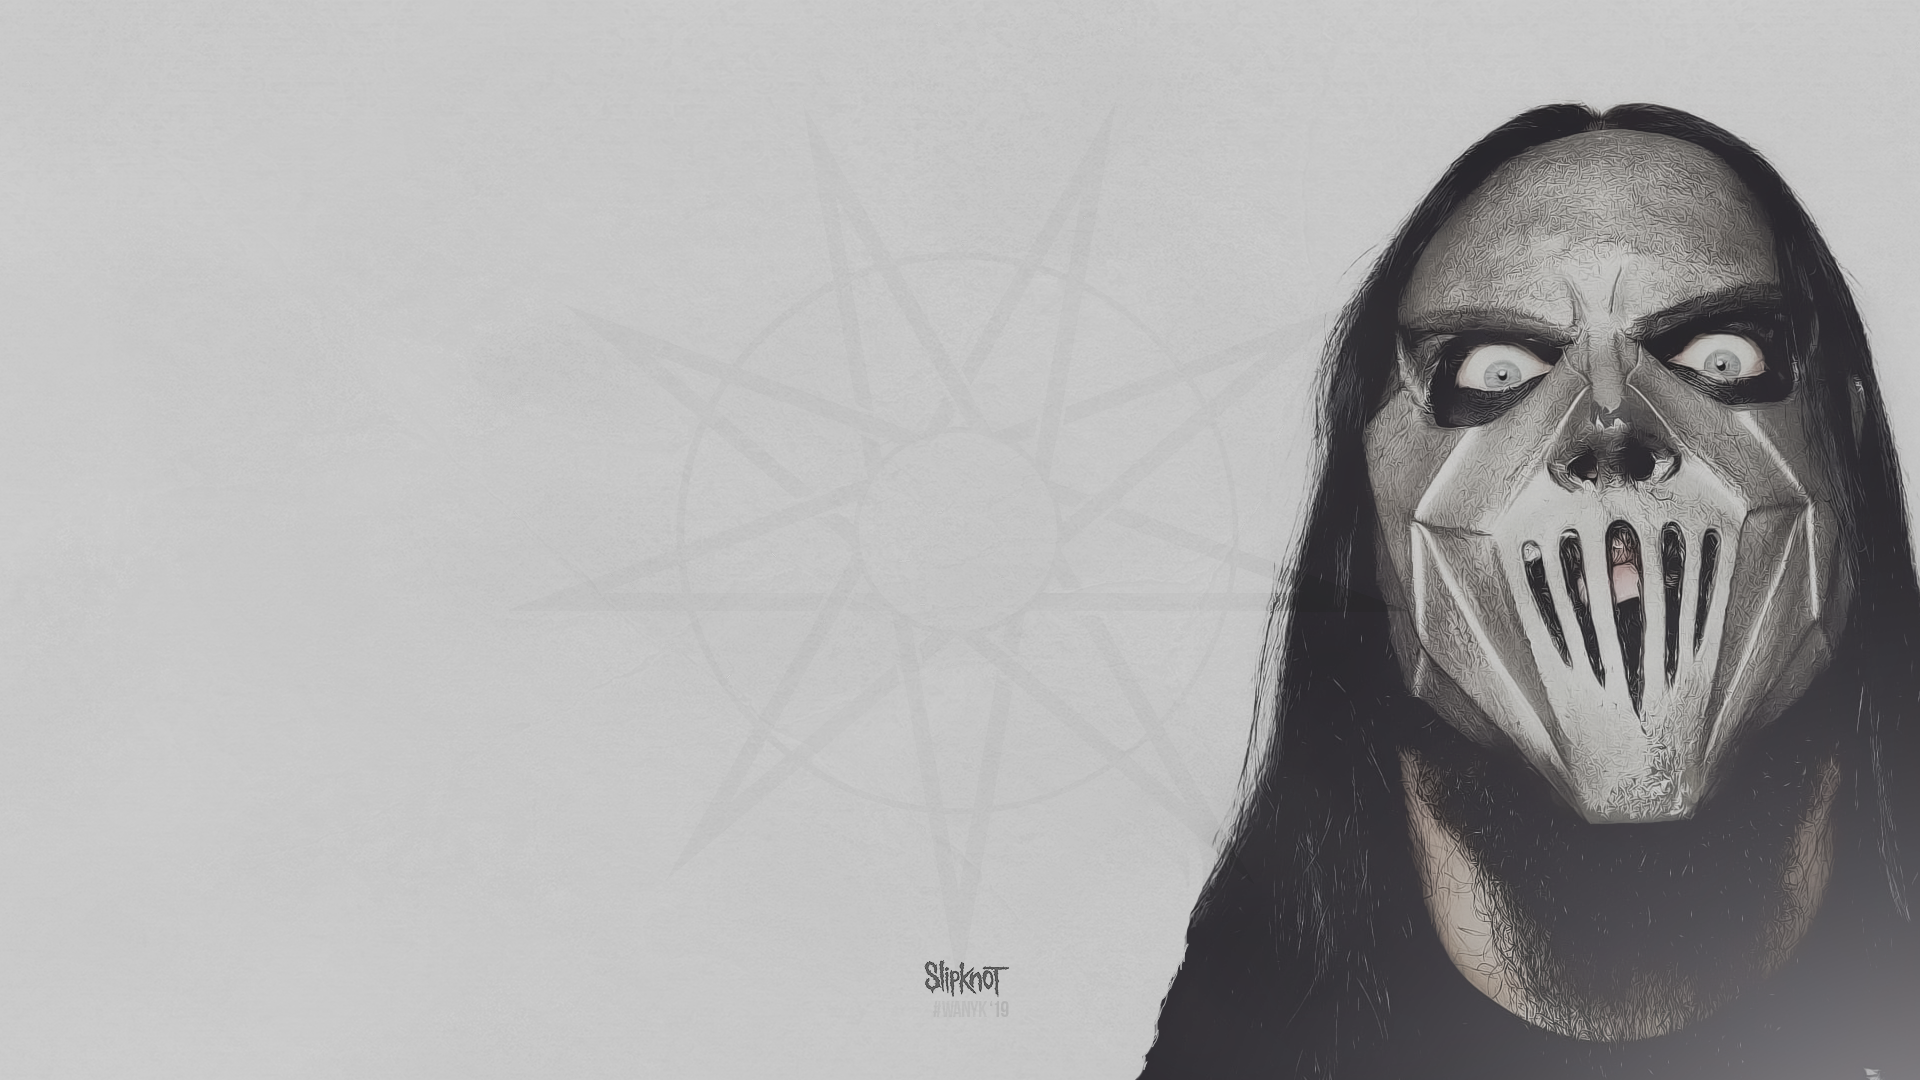 Slipknot WANYK We Are Not Your Kind 2019 Mick Thomson 1920x1080